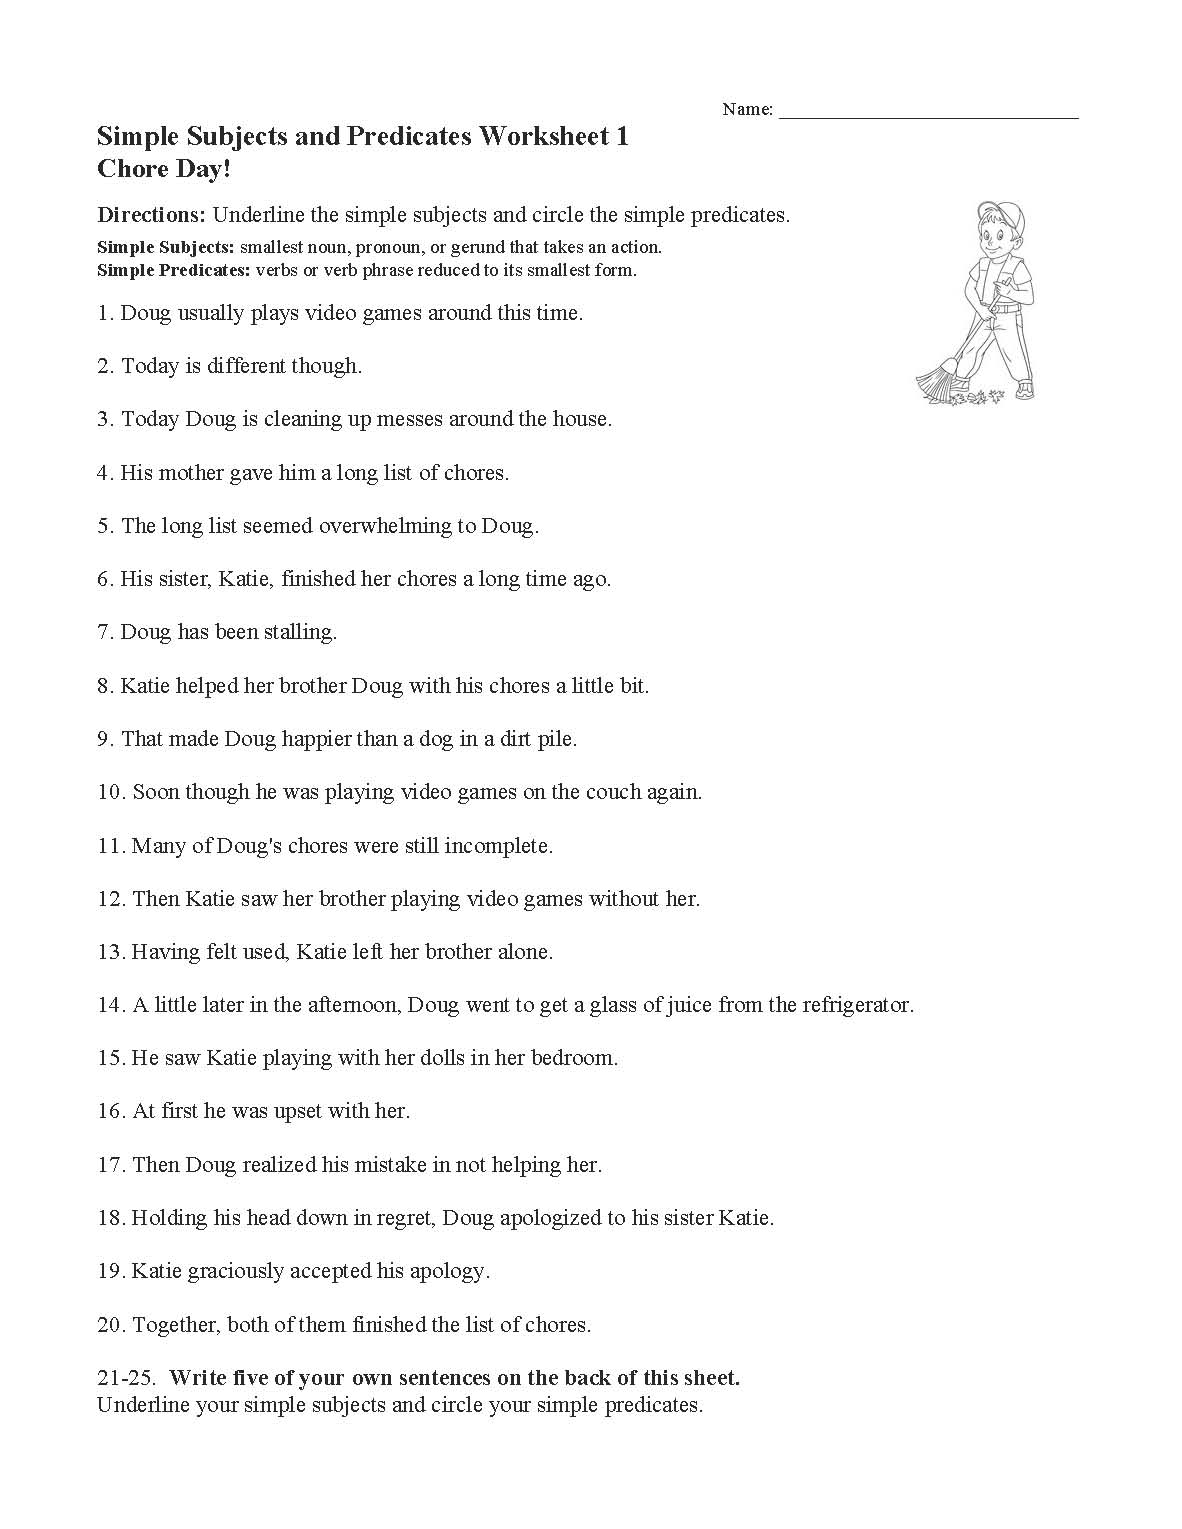 Simple Subjects And Predicates Worksheet 1 Sentence Structure Activity